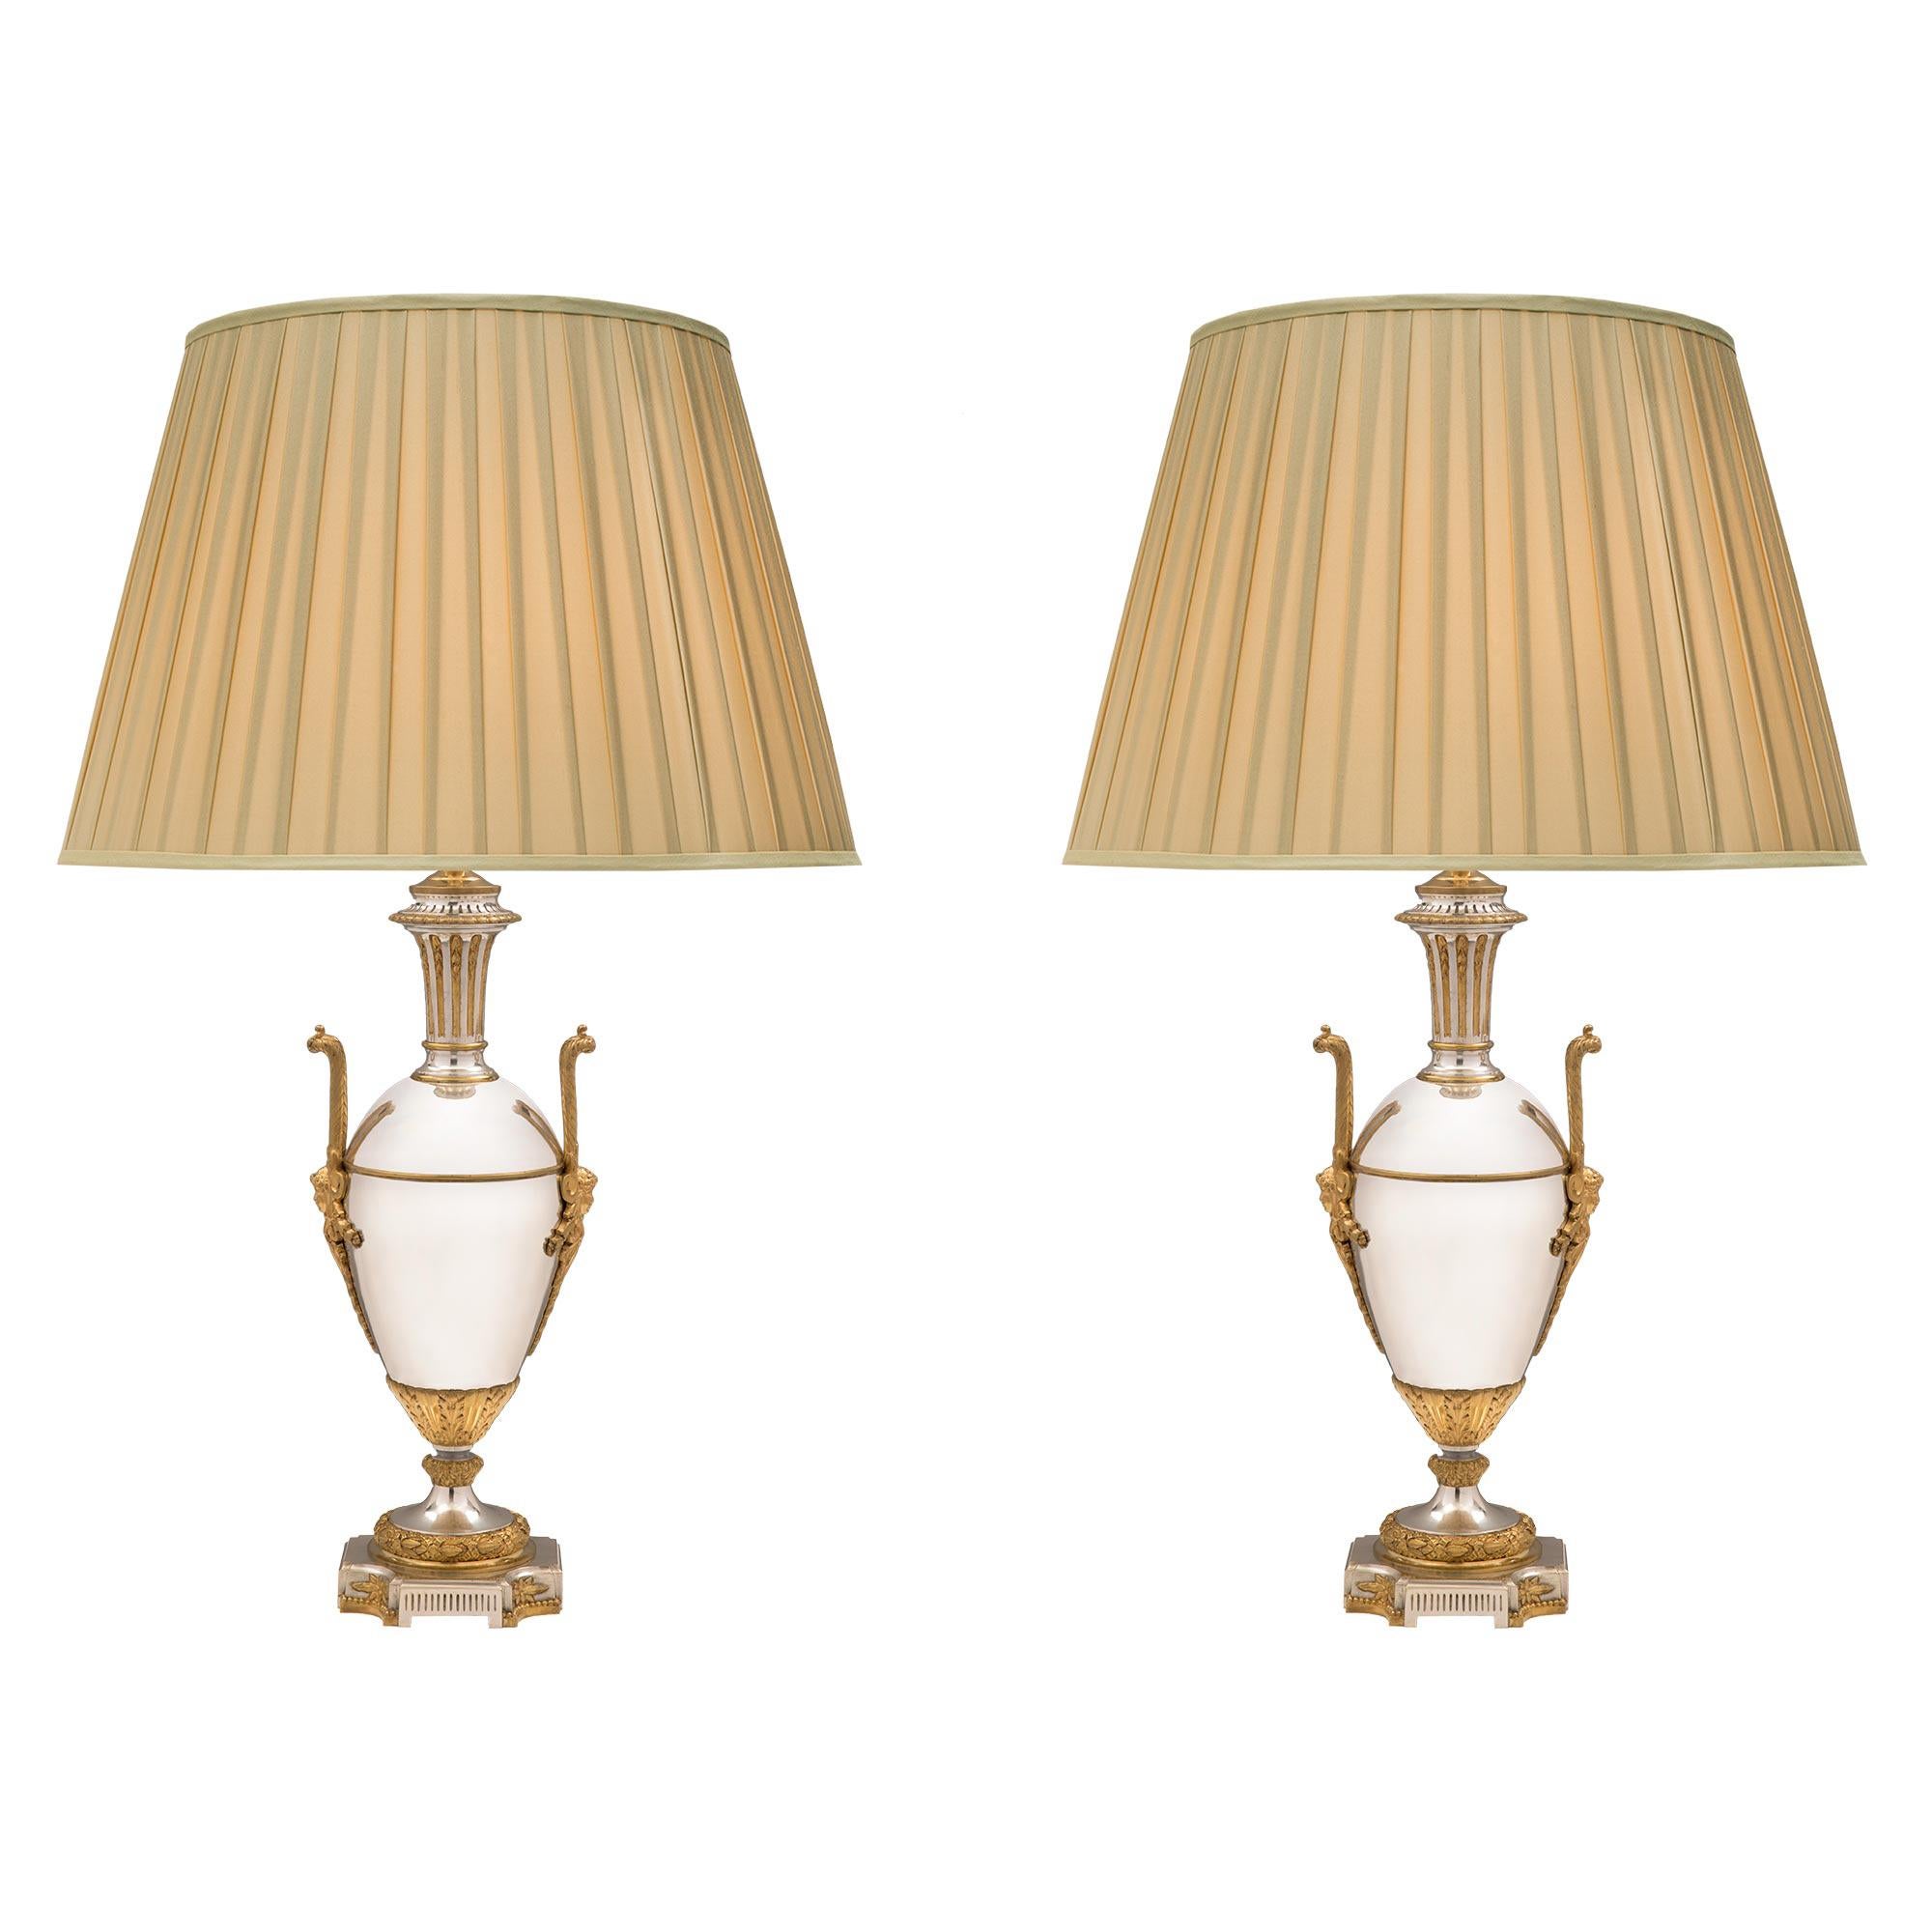 Pair of French 19th Century Louis XVI Style Silvered Bronze and Ormolu Lamps